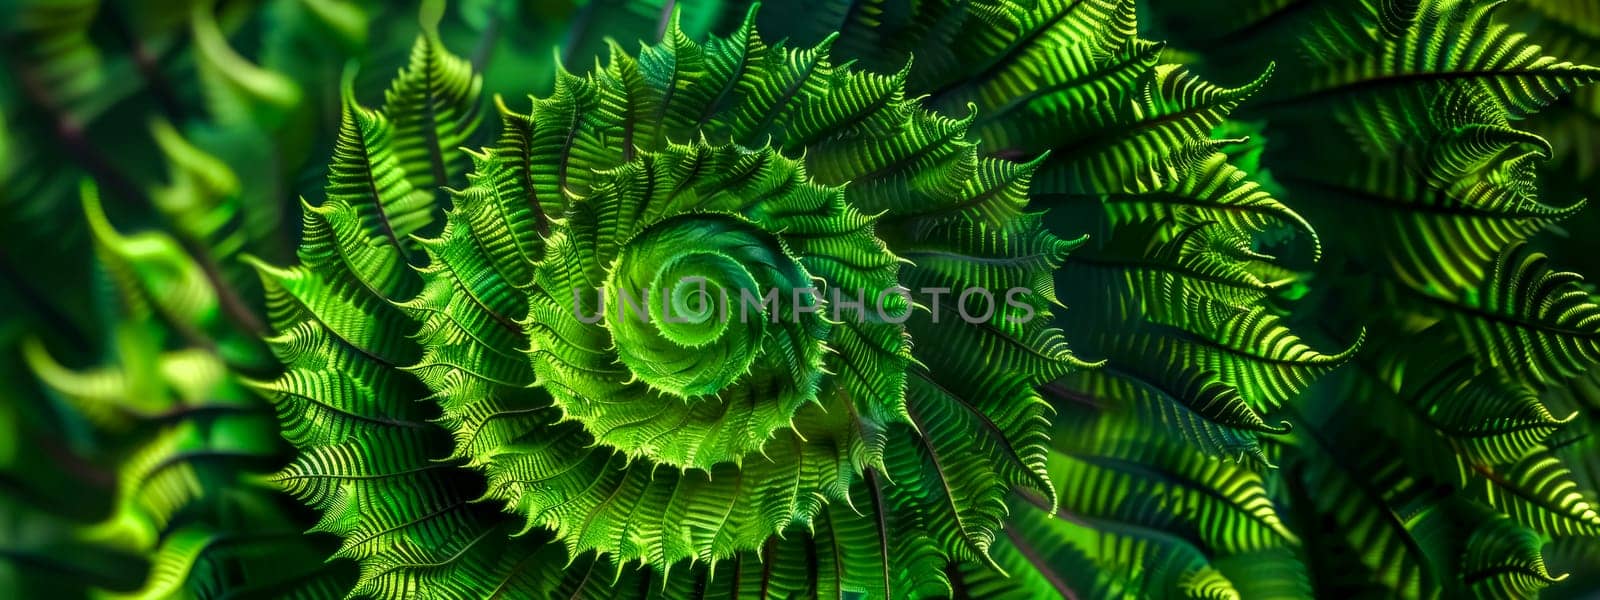 Detailed macro photo showcasing the natural spiral pattern of a vibrant green fern